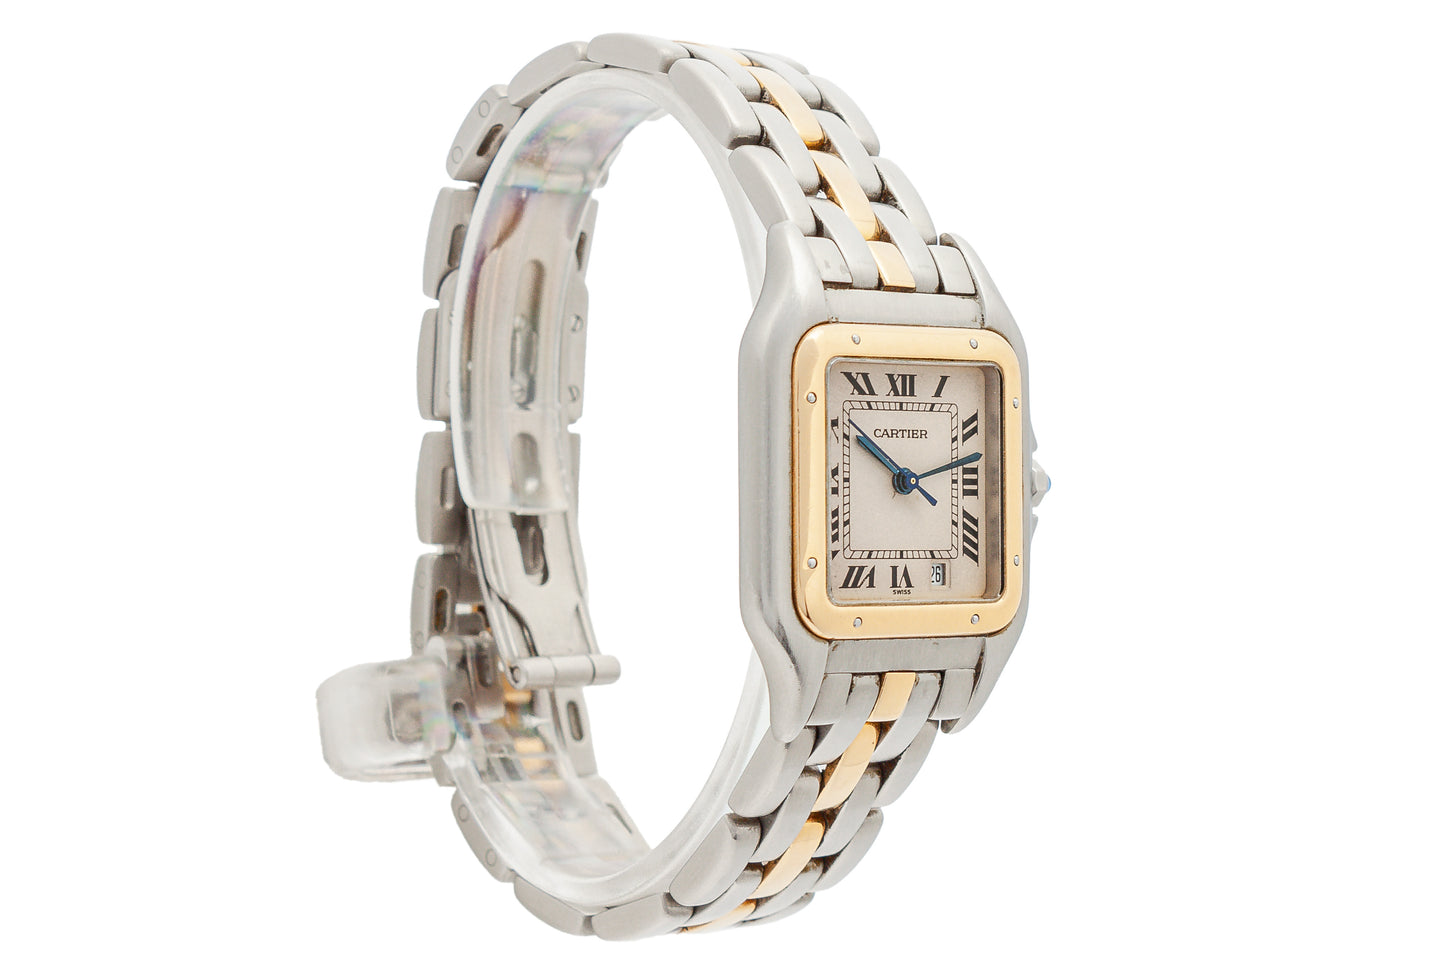 Cartier Panthere Ref. 183949 - "Very good" condition